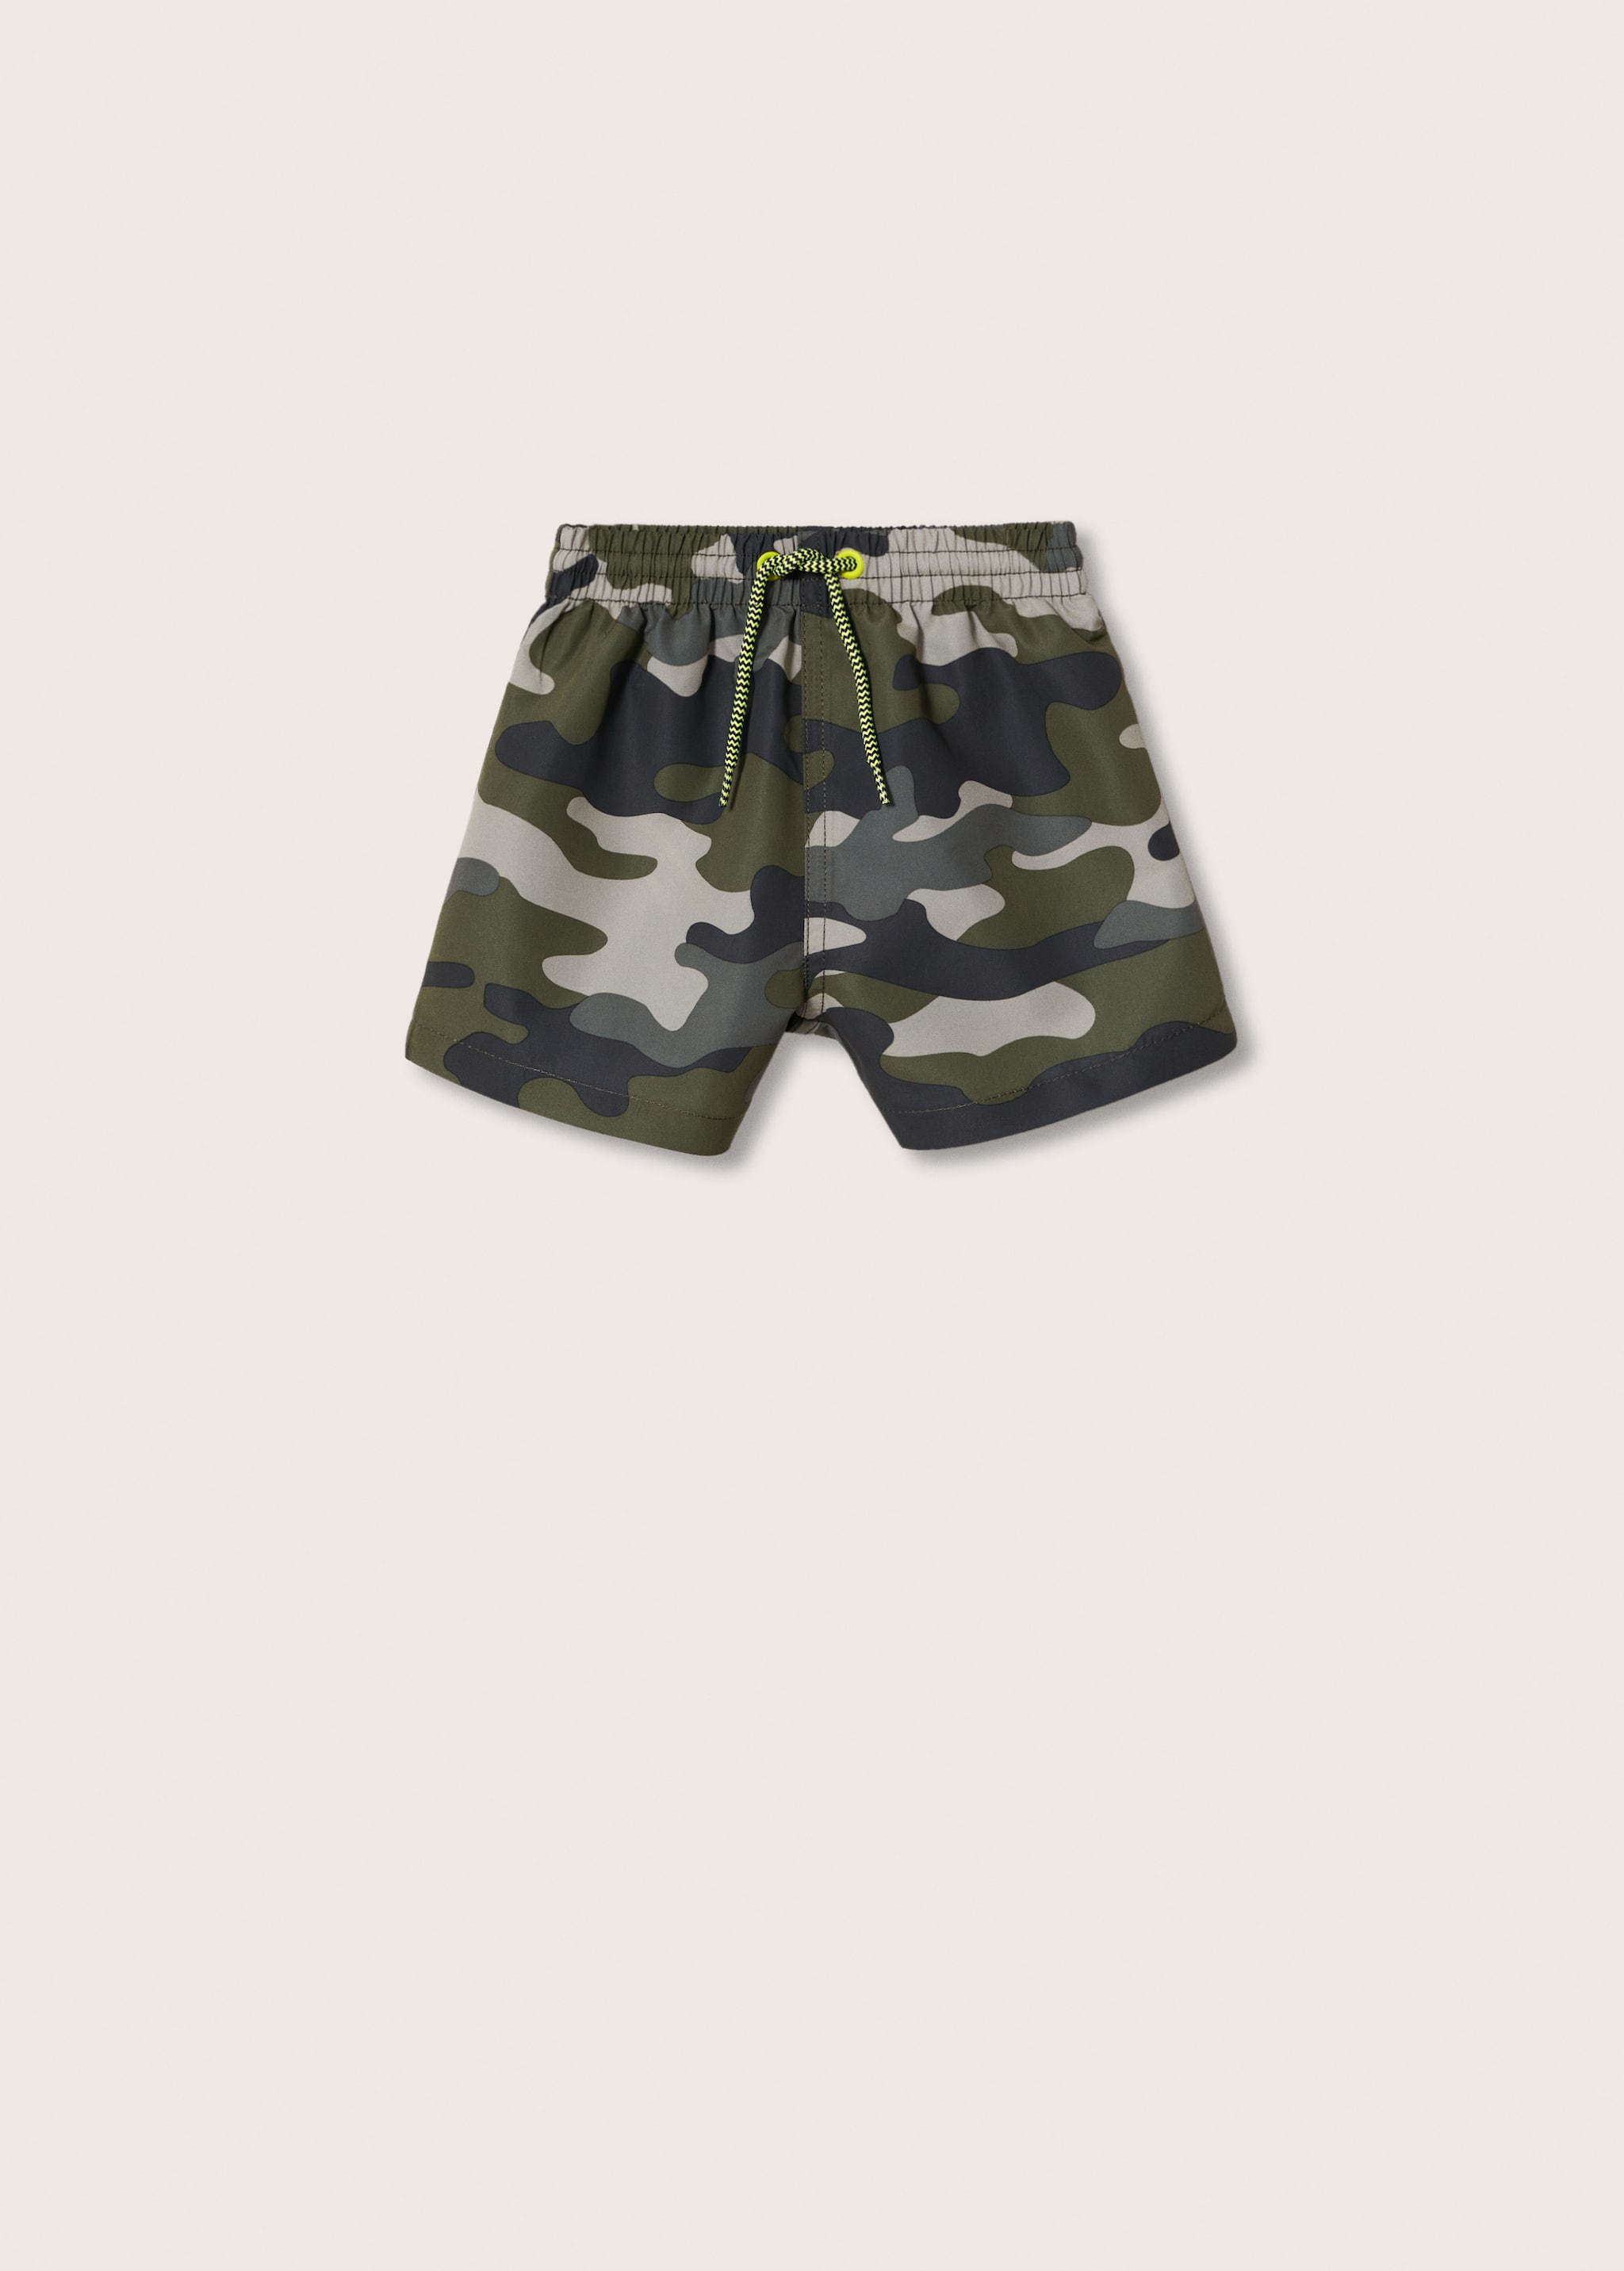 Camouflage print swimming trunks - Article without model